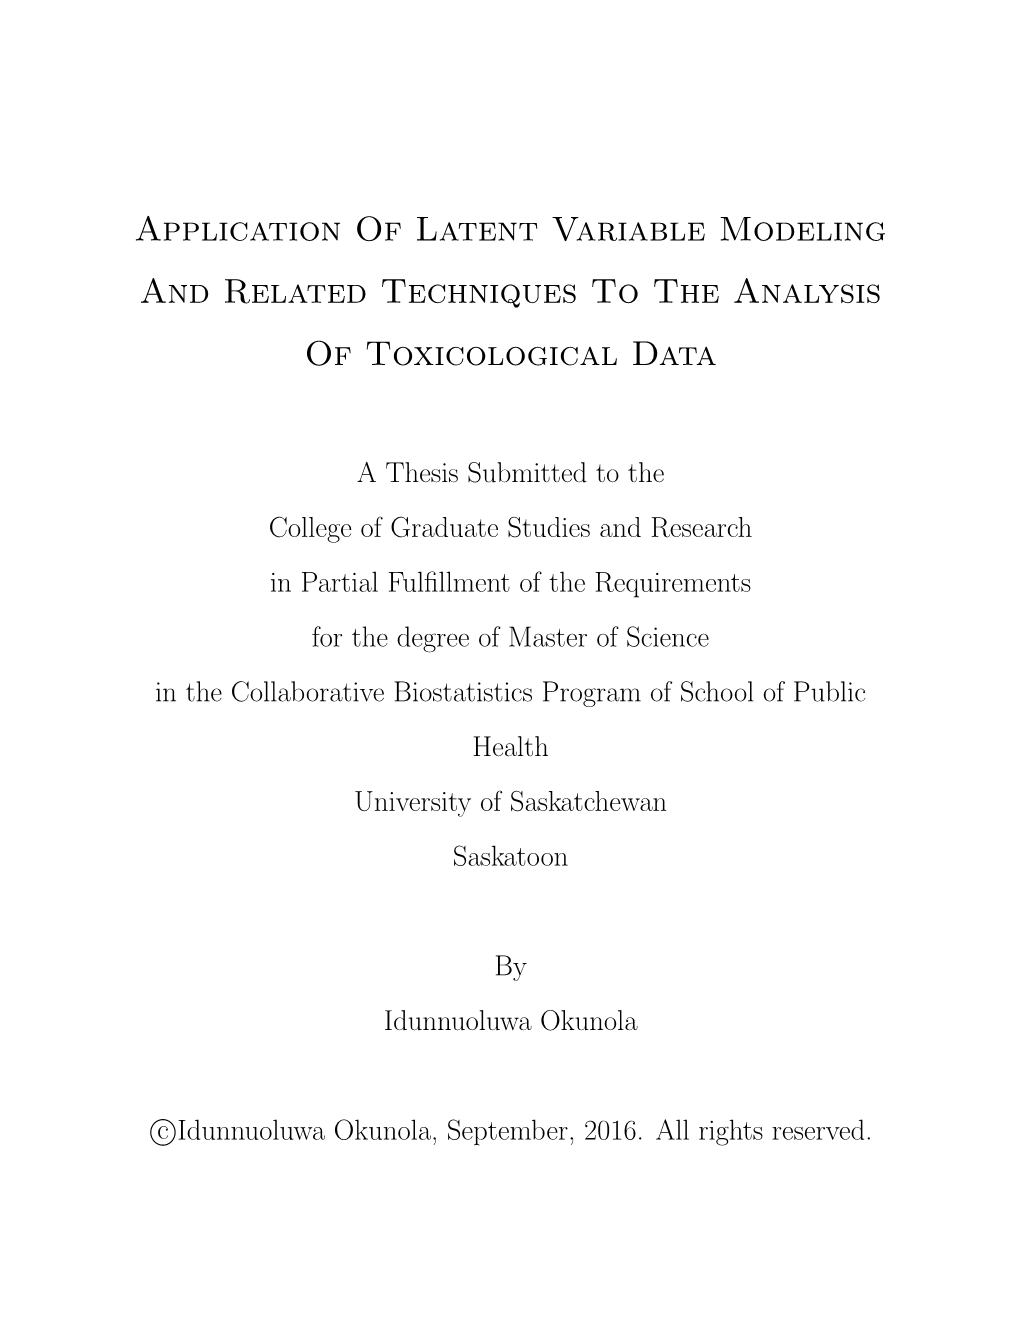 Application of Latent Variable Modeling and Related Techniques to the Analysis of Toxicological Data